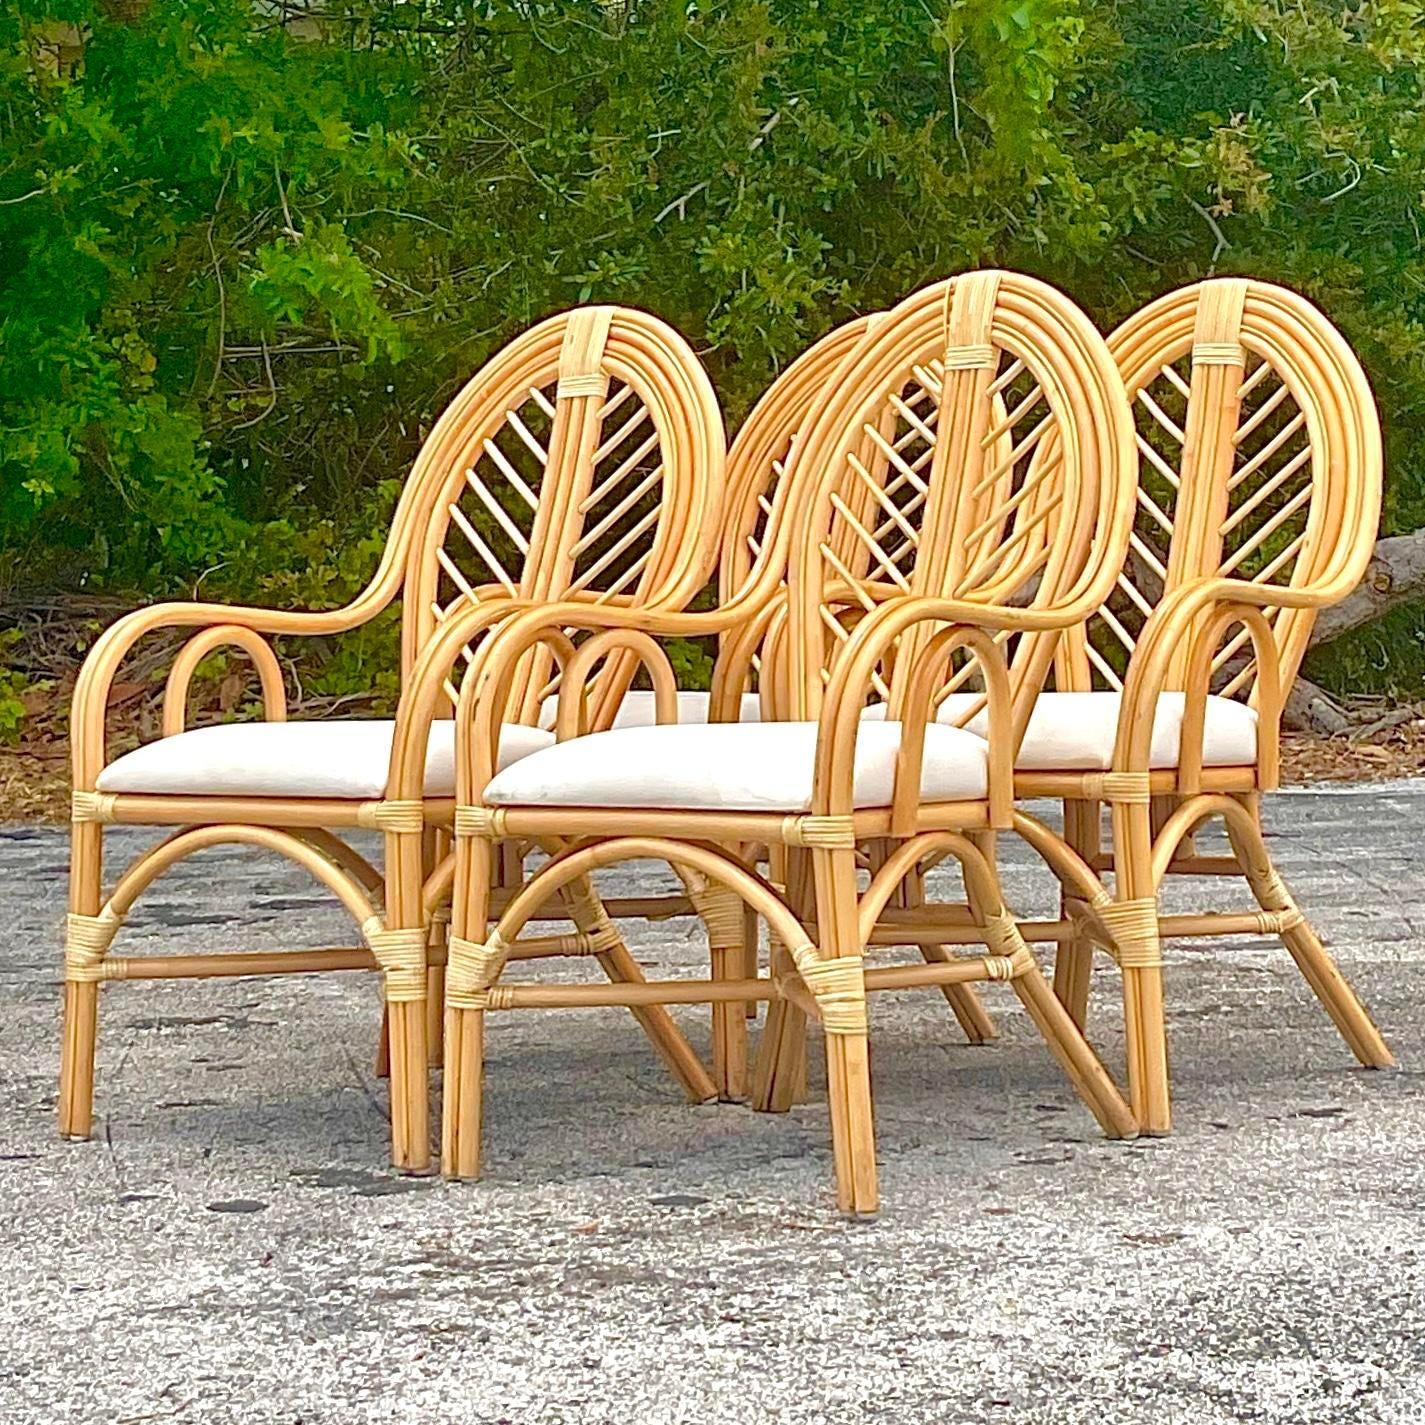 Upholstery Vintage Coastal Bent Rattan Dining Chairs - Set of 4 For Sale